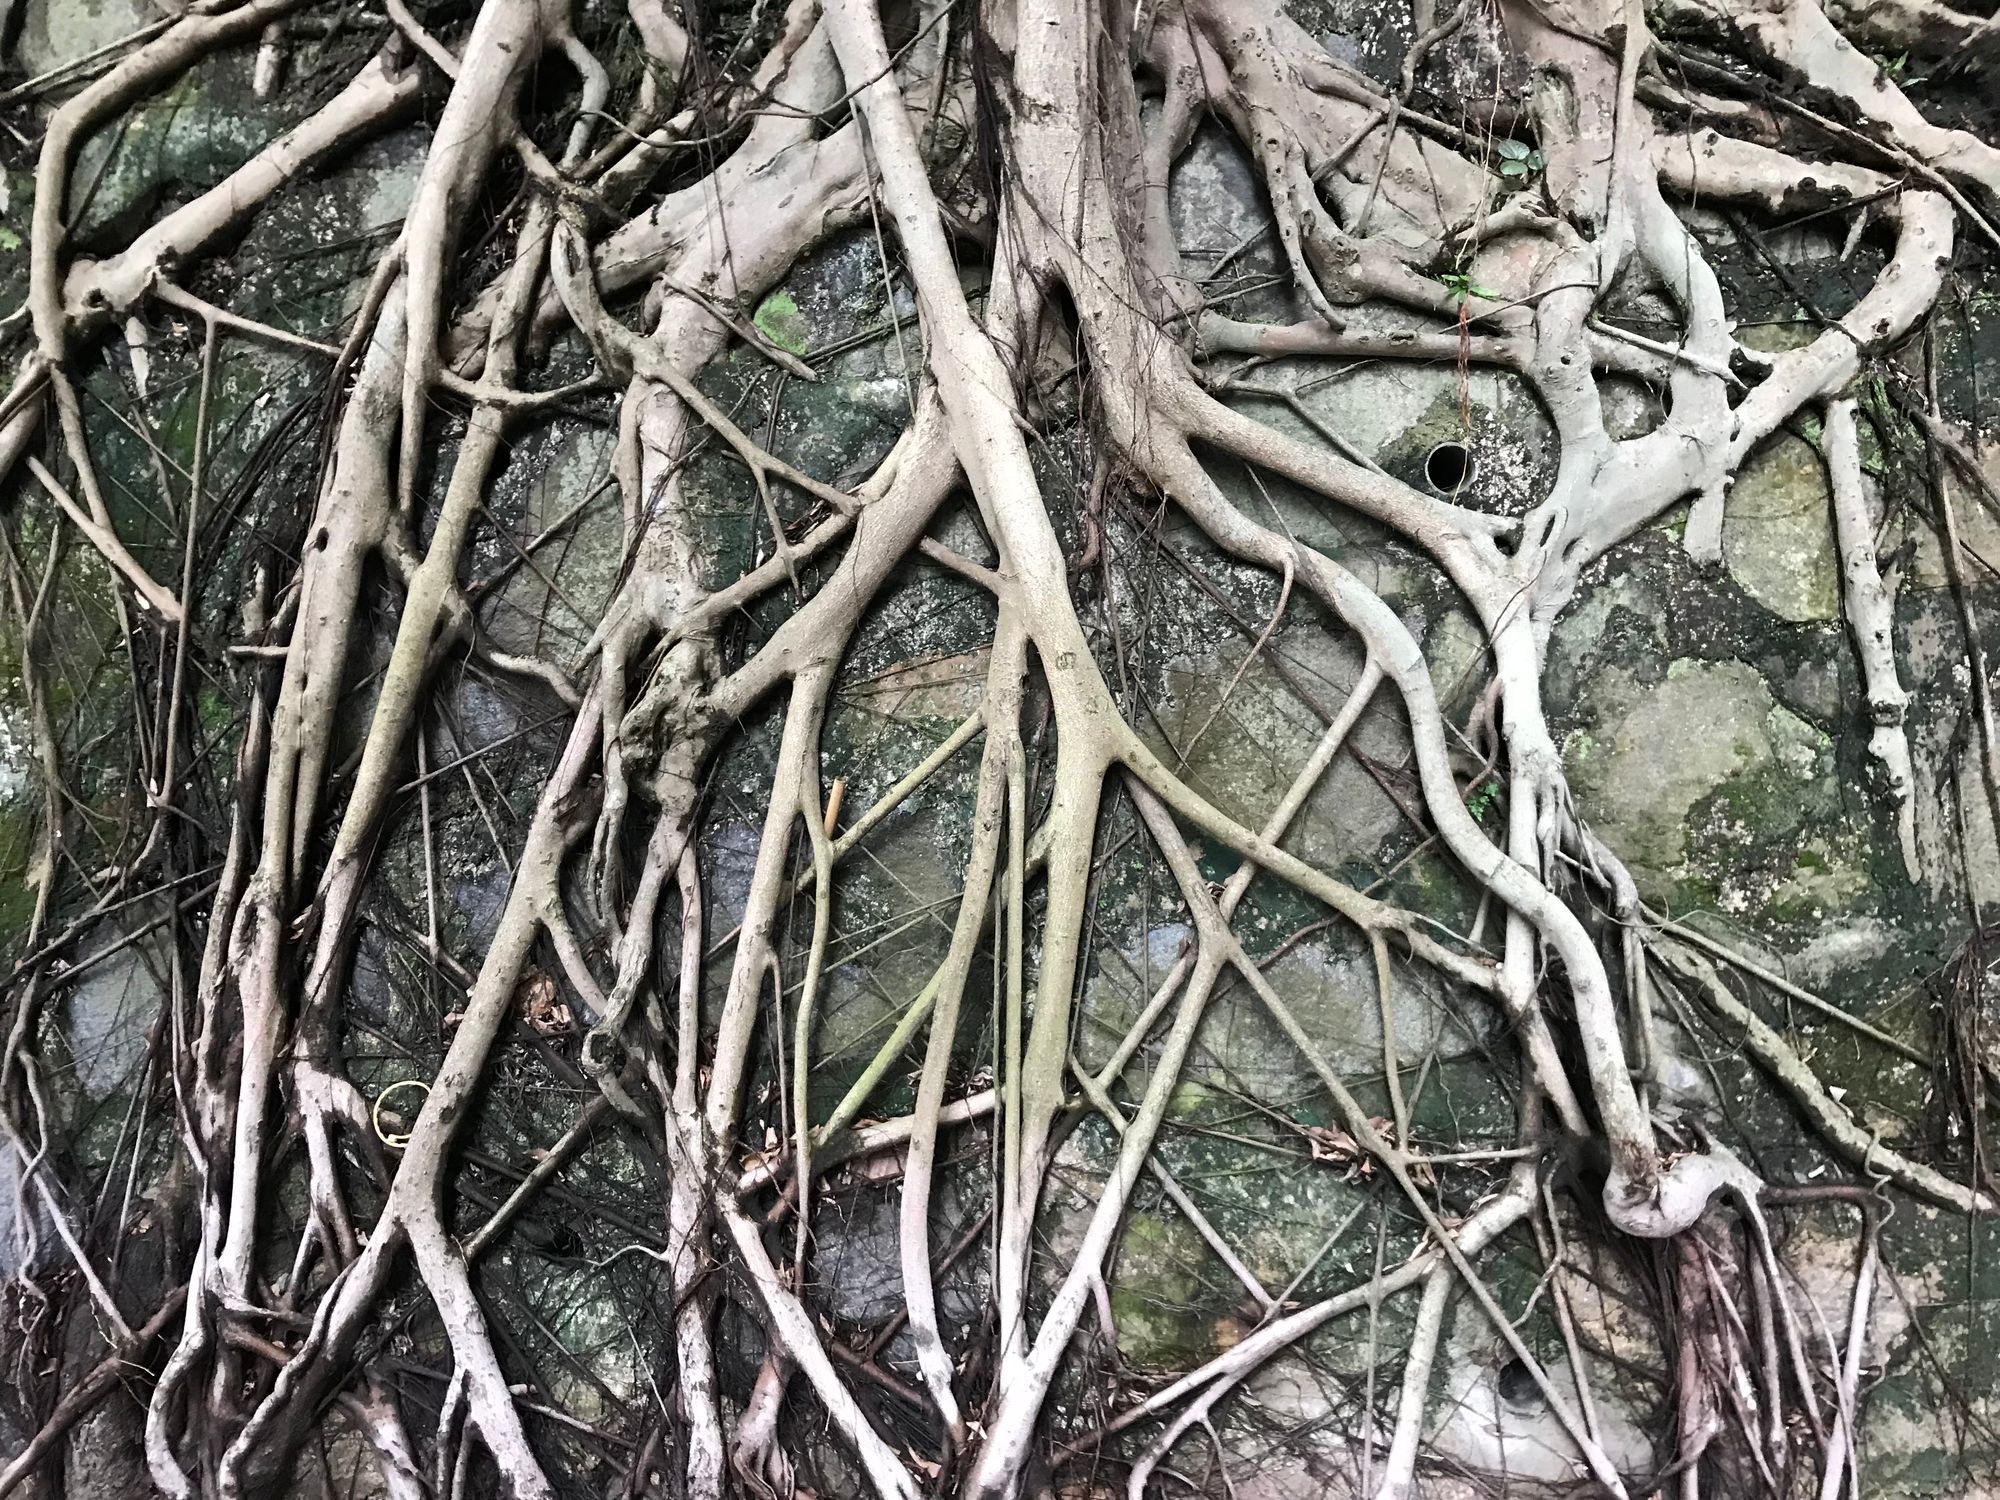 A network of banyan roots on an old stone wall.